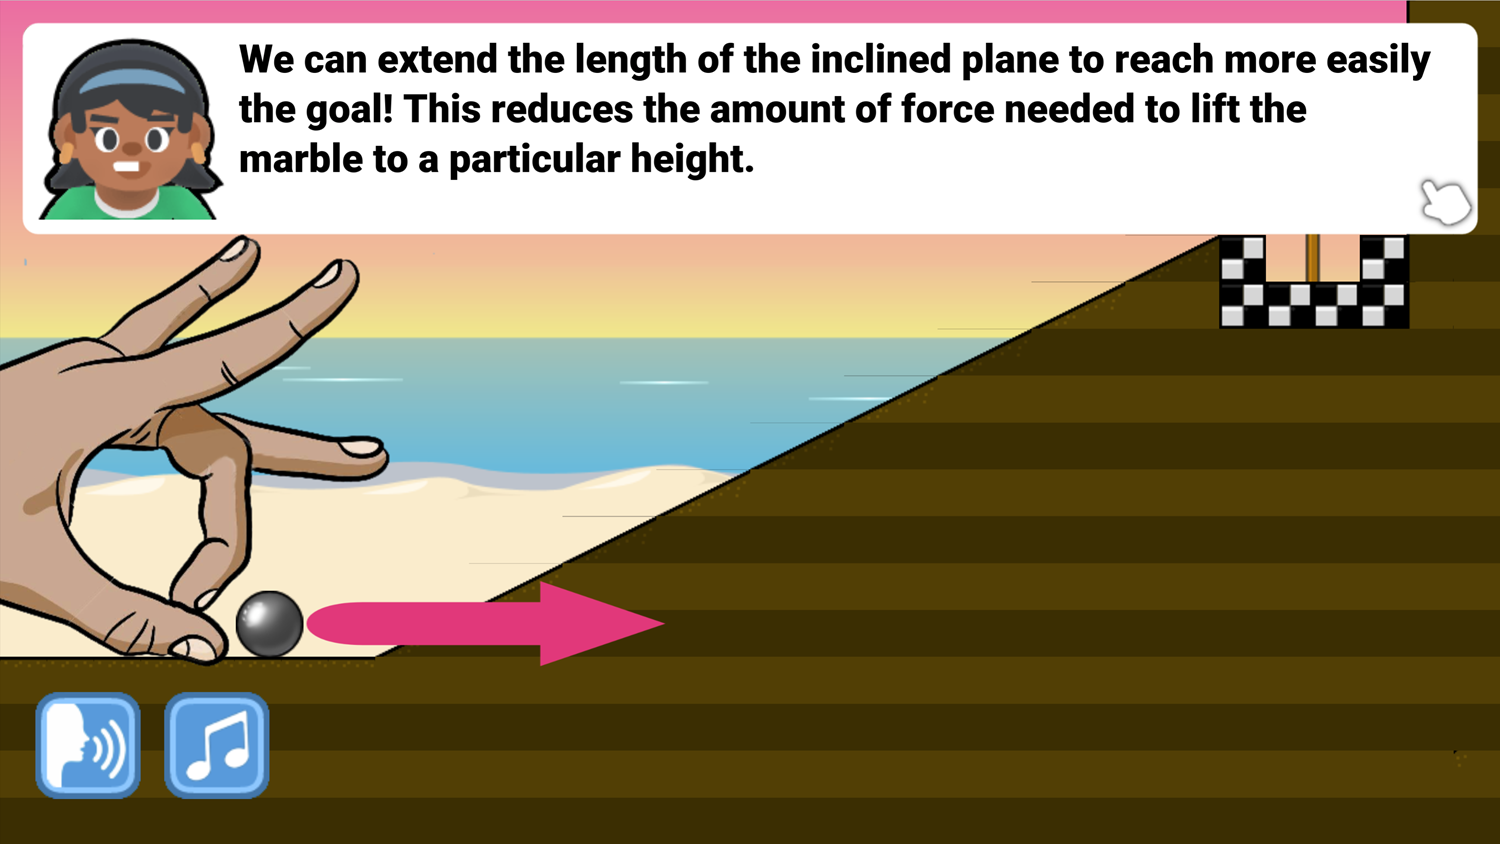 Marbles And Forces Inclined Plane Length Screenshot.